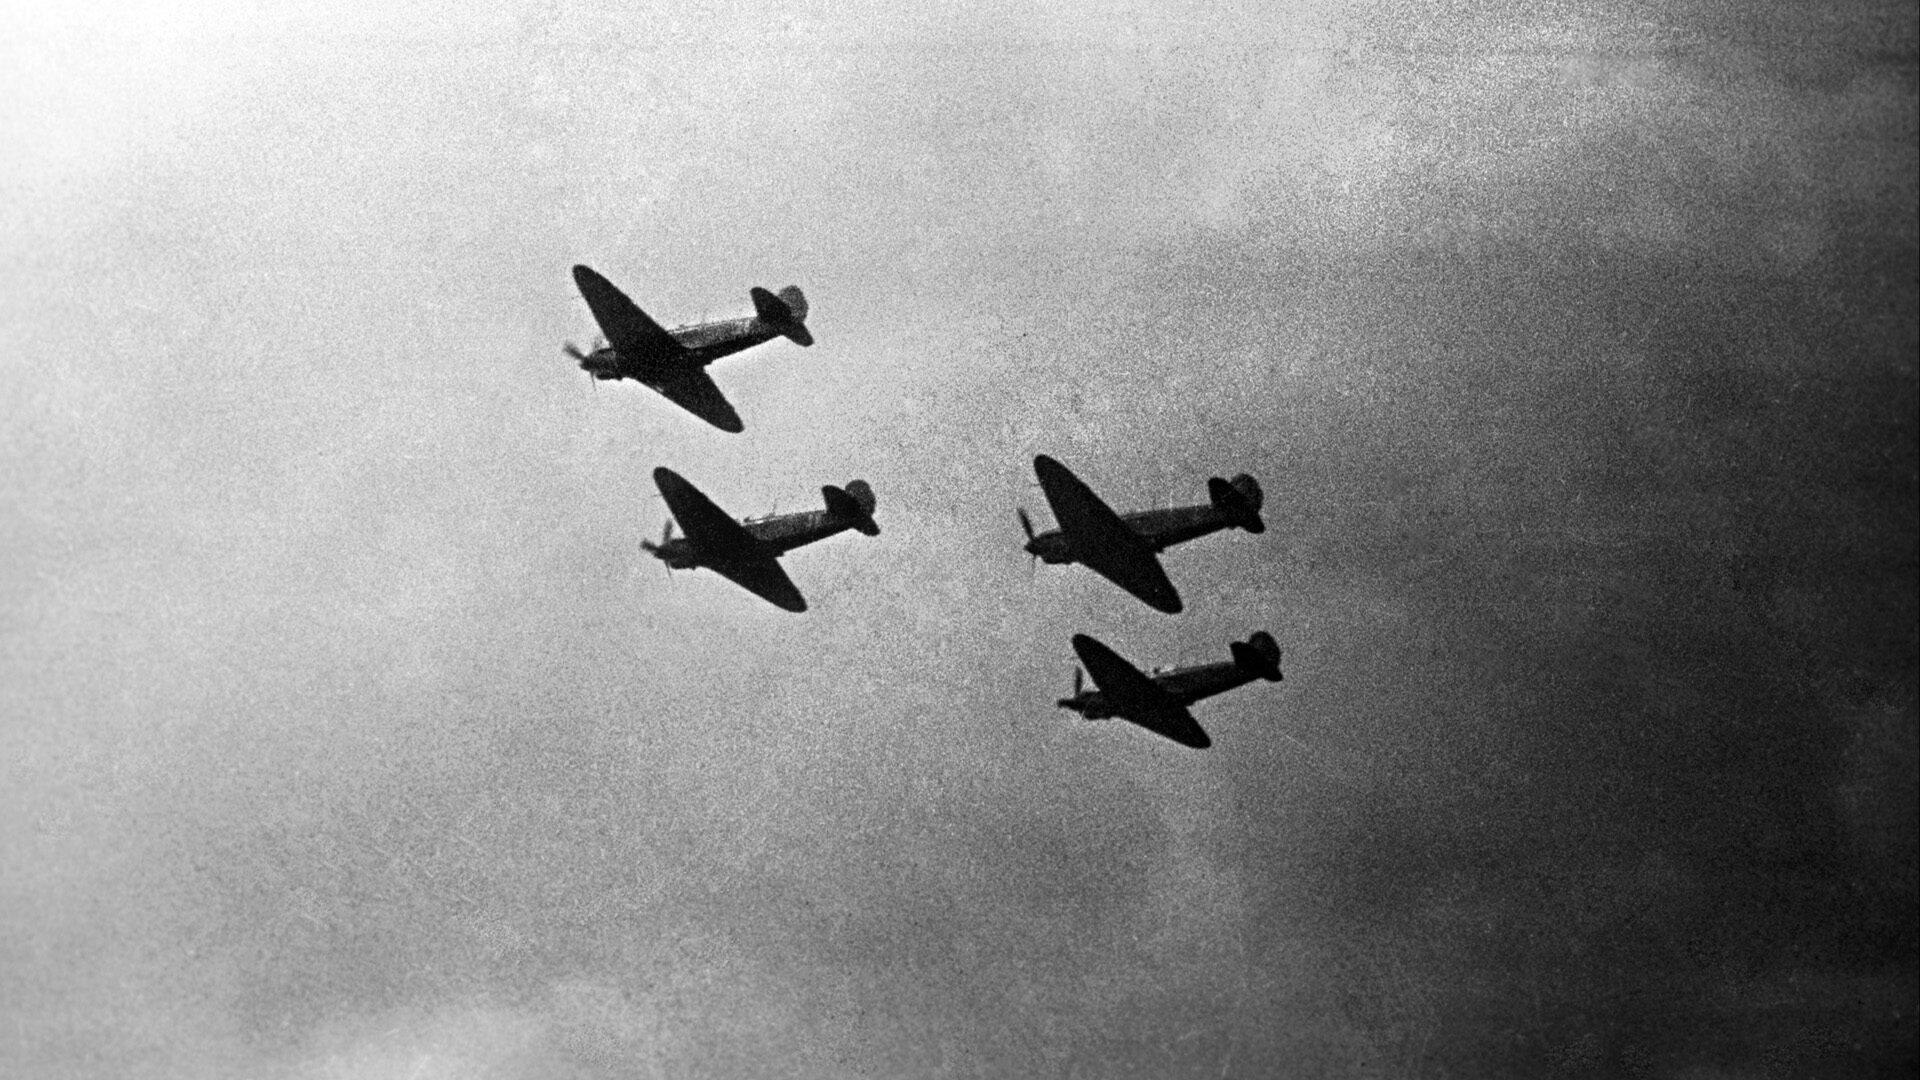 Four Yakovlev fighters of the Normandie Niemen fly in close formation in the skies over the Soviet Union.